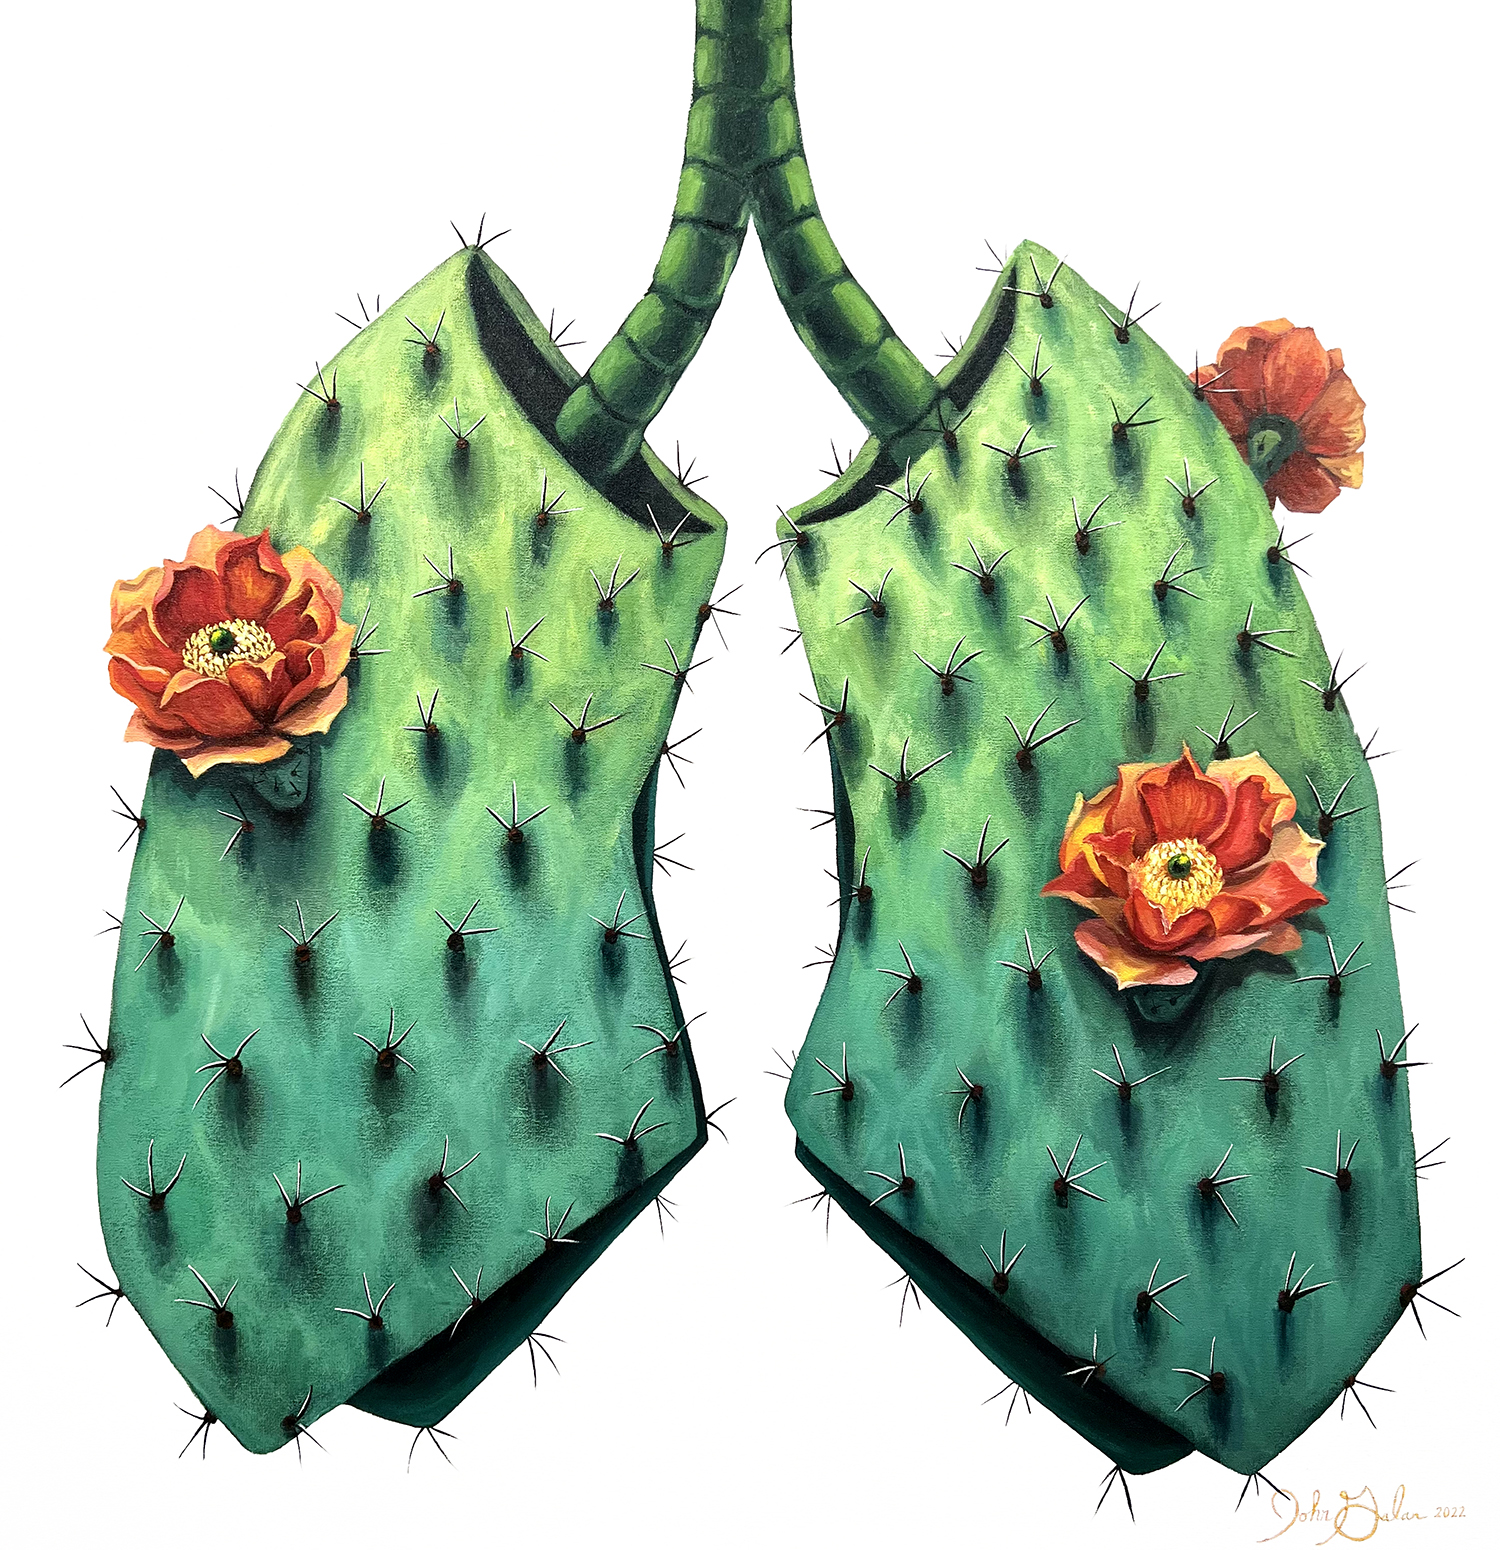 Painting of a cactus